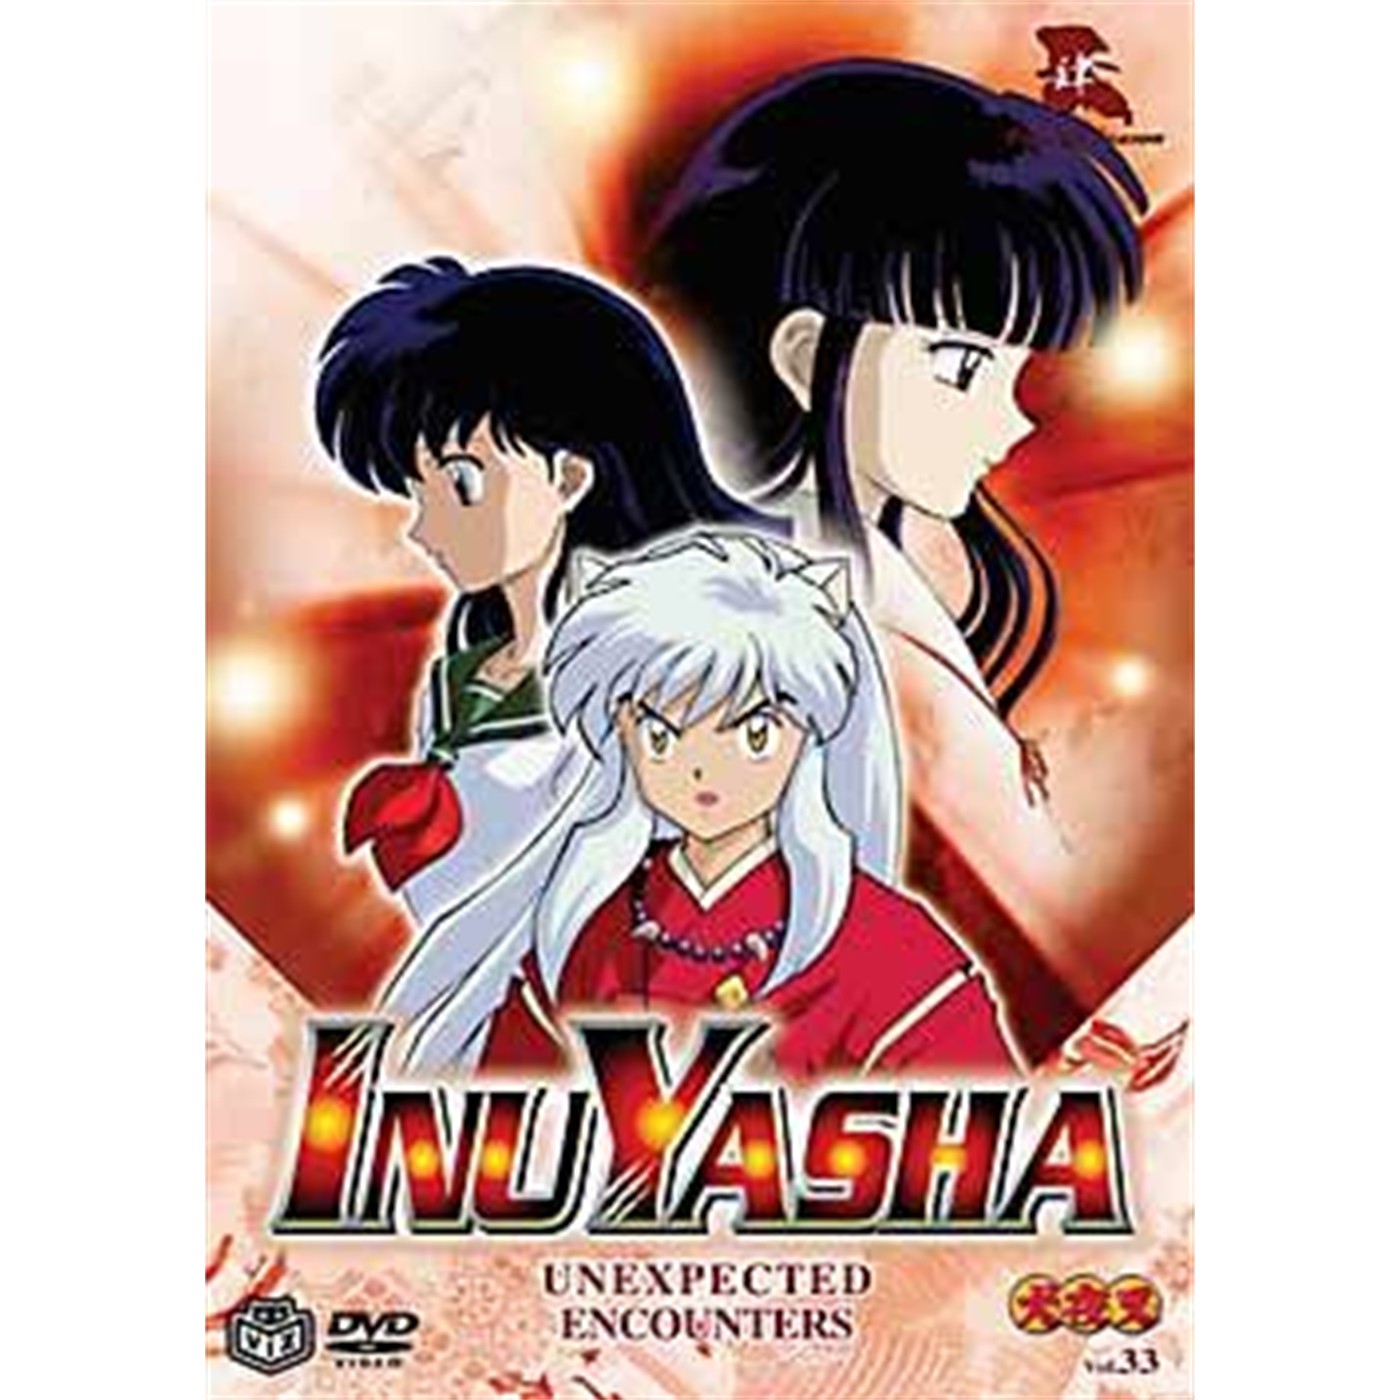 InuYasha, Vol. 33: Unexpected Encounters (DVD)